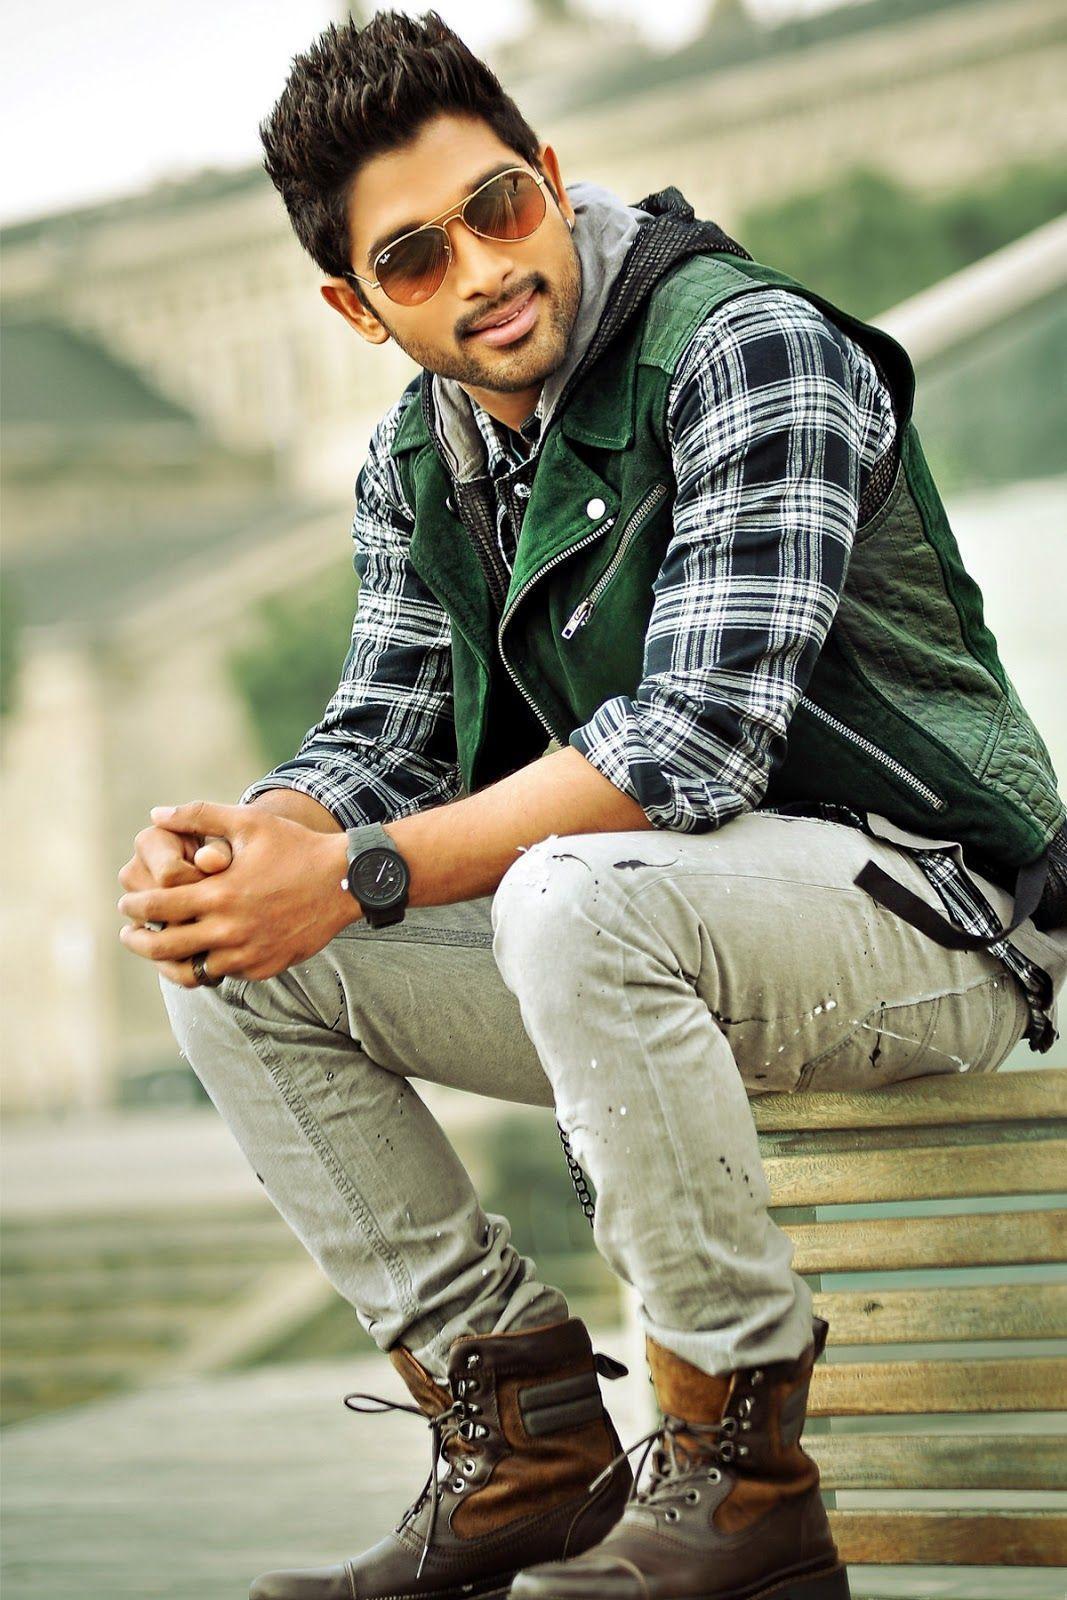 Download Allu Arjun Images: A Spectacular Collection of 999+ Allu Arjun Images in Full 4K